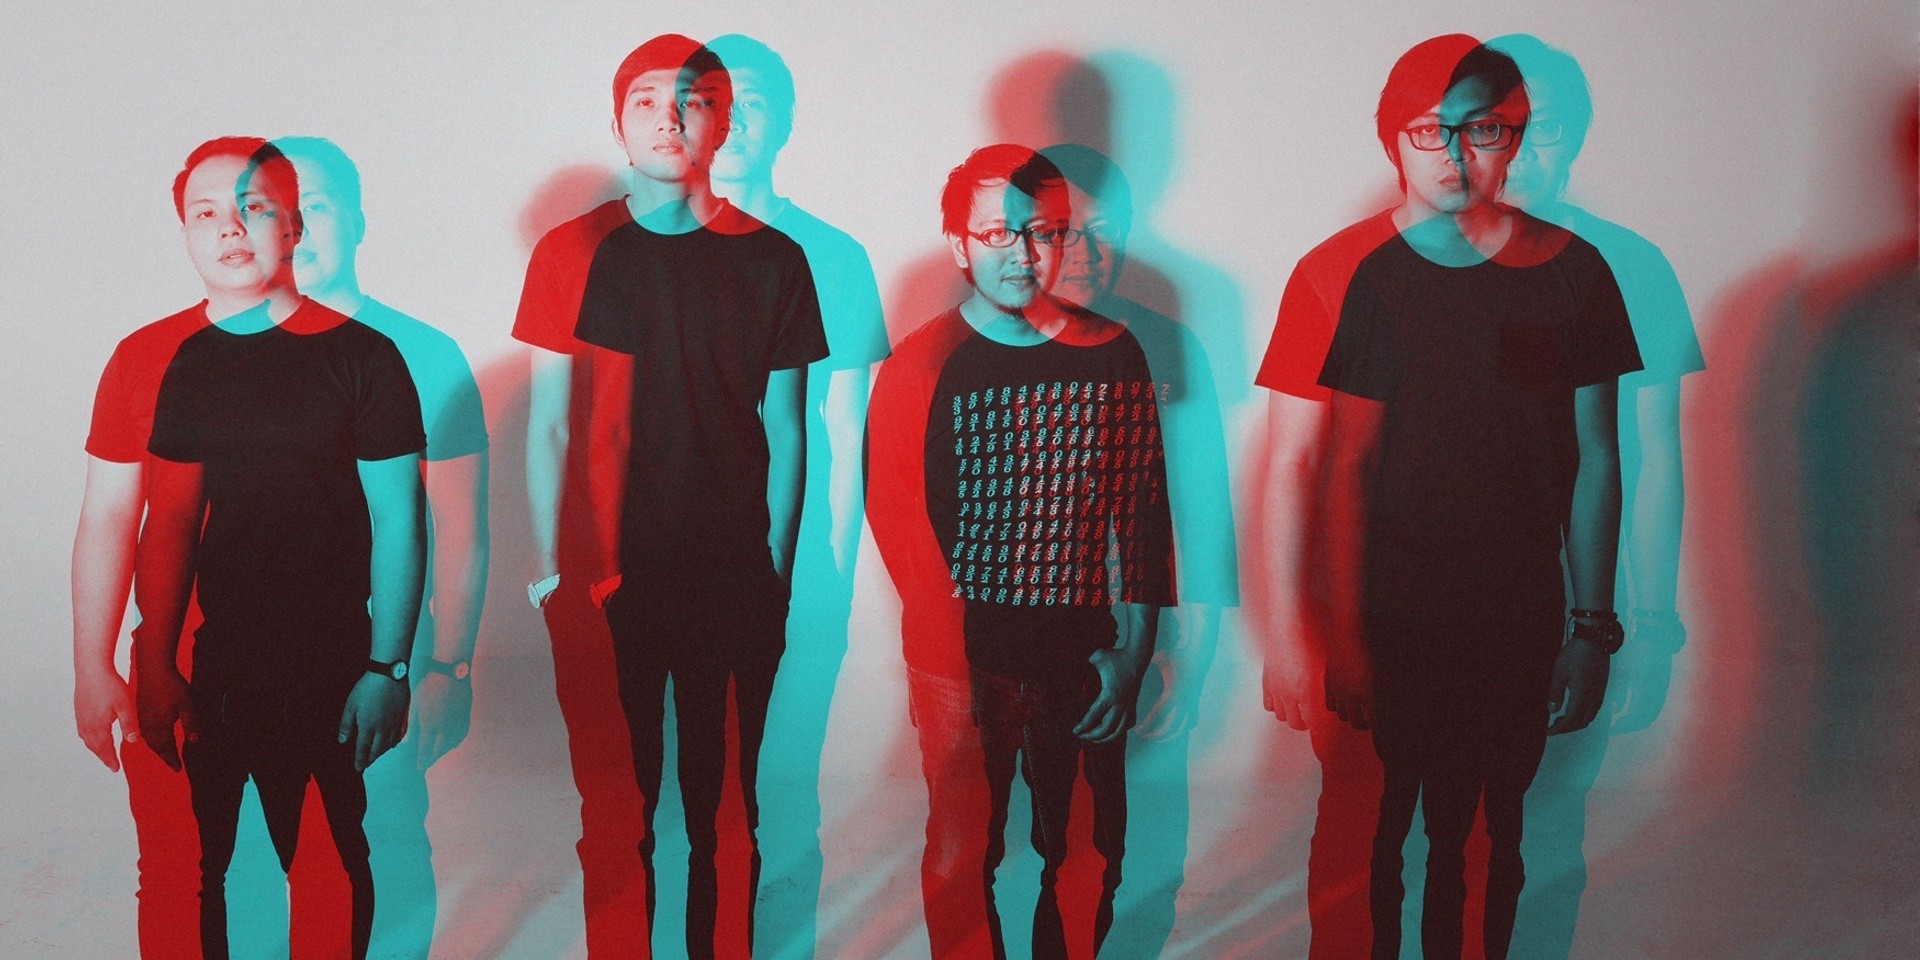 WATCH: tide/edit release new videos for exclusive tracks featured on Japan release